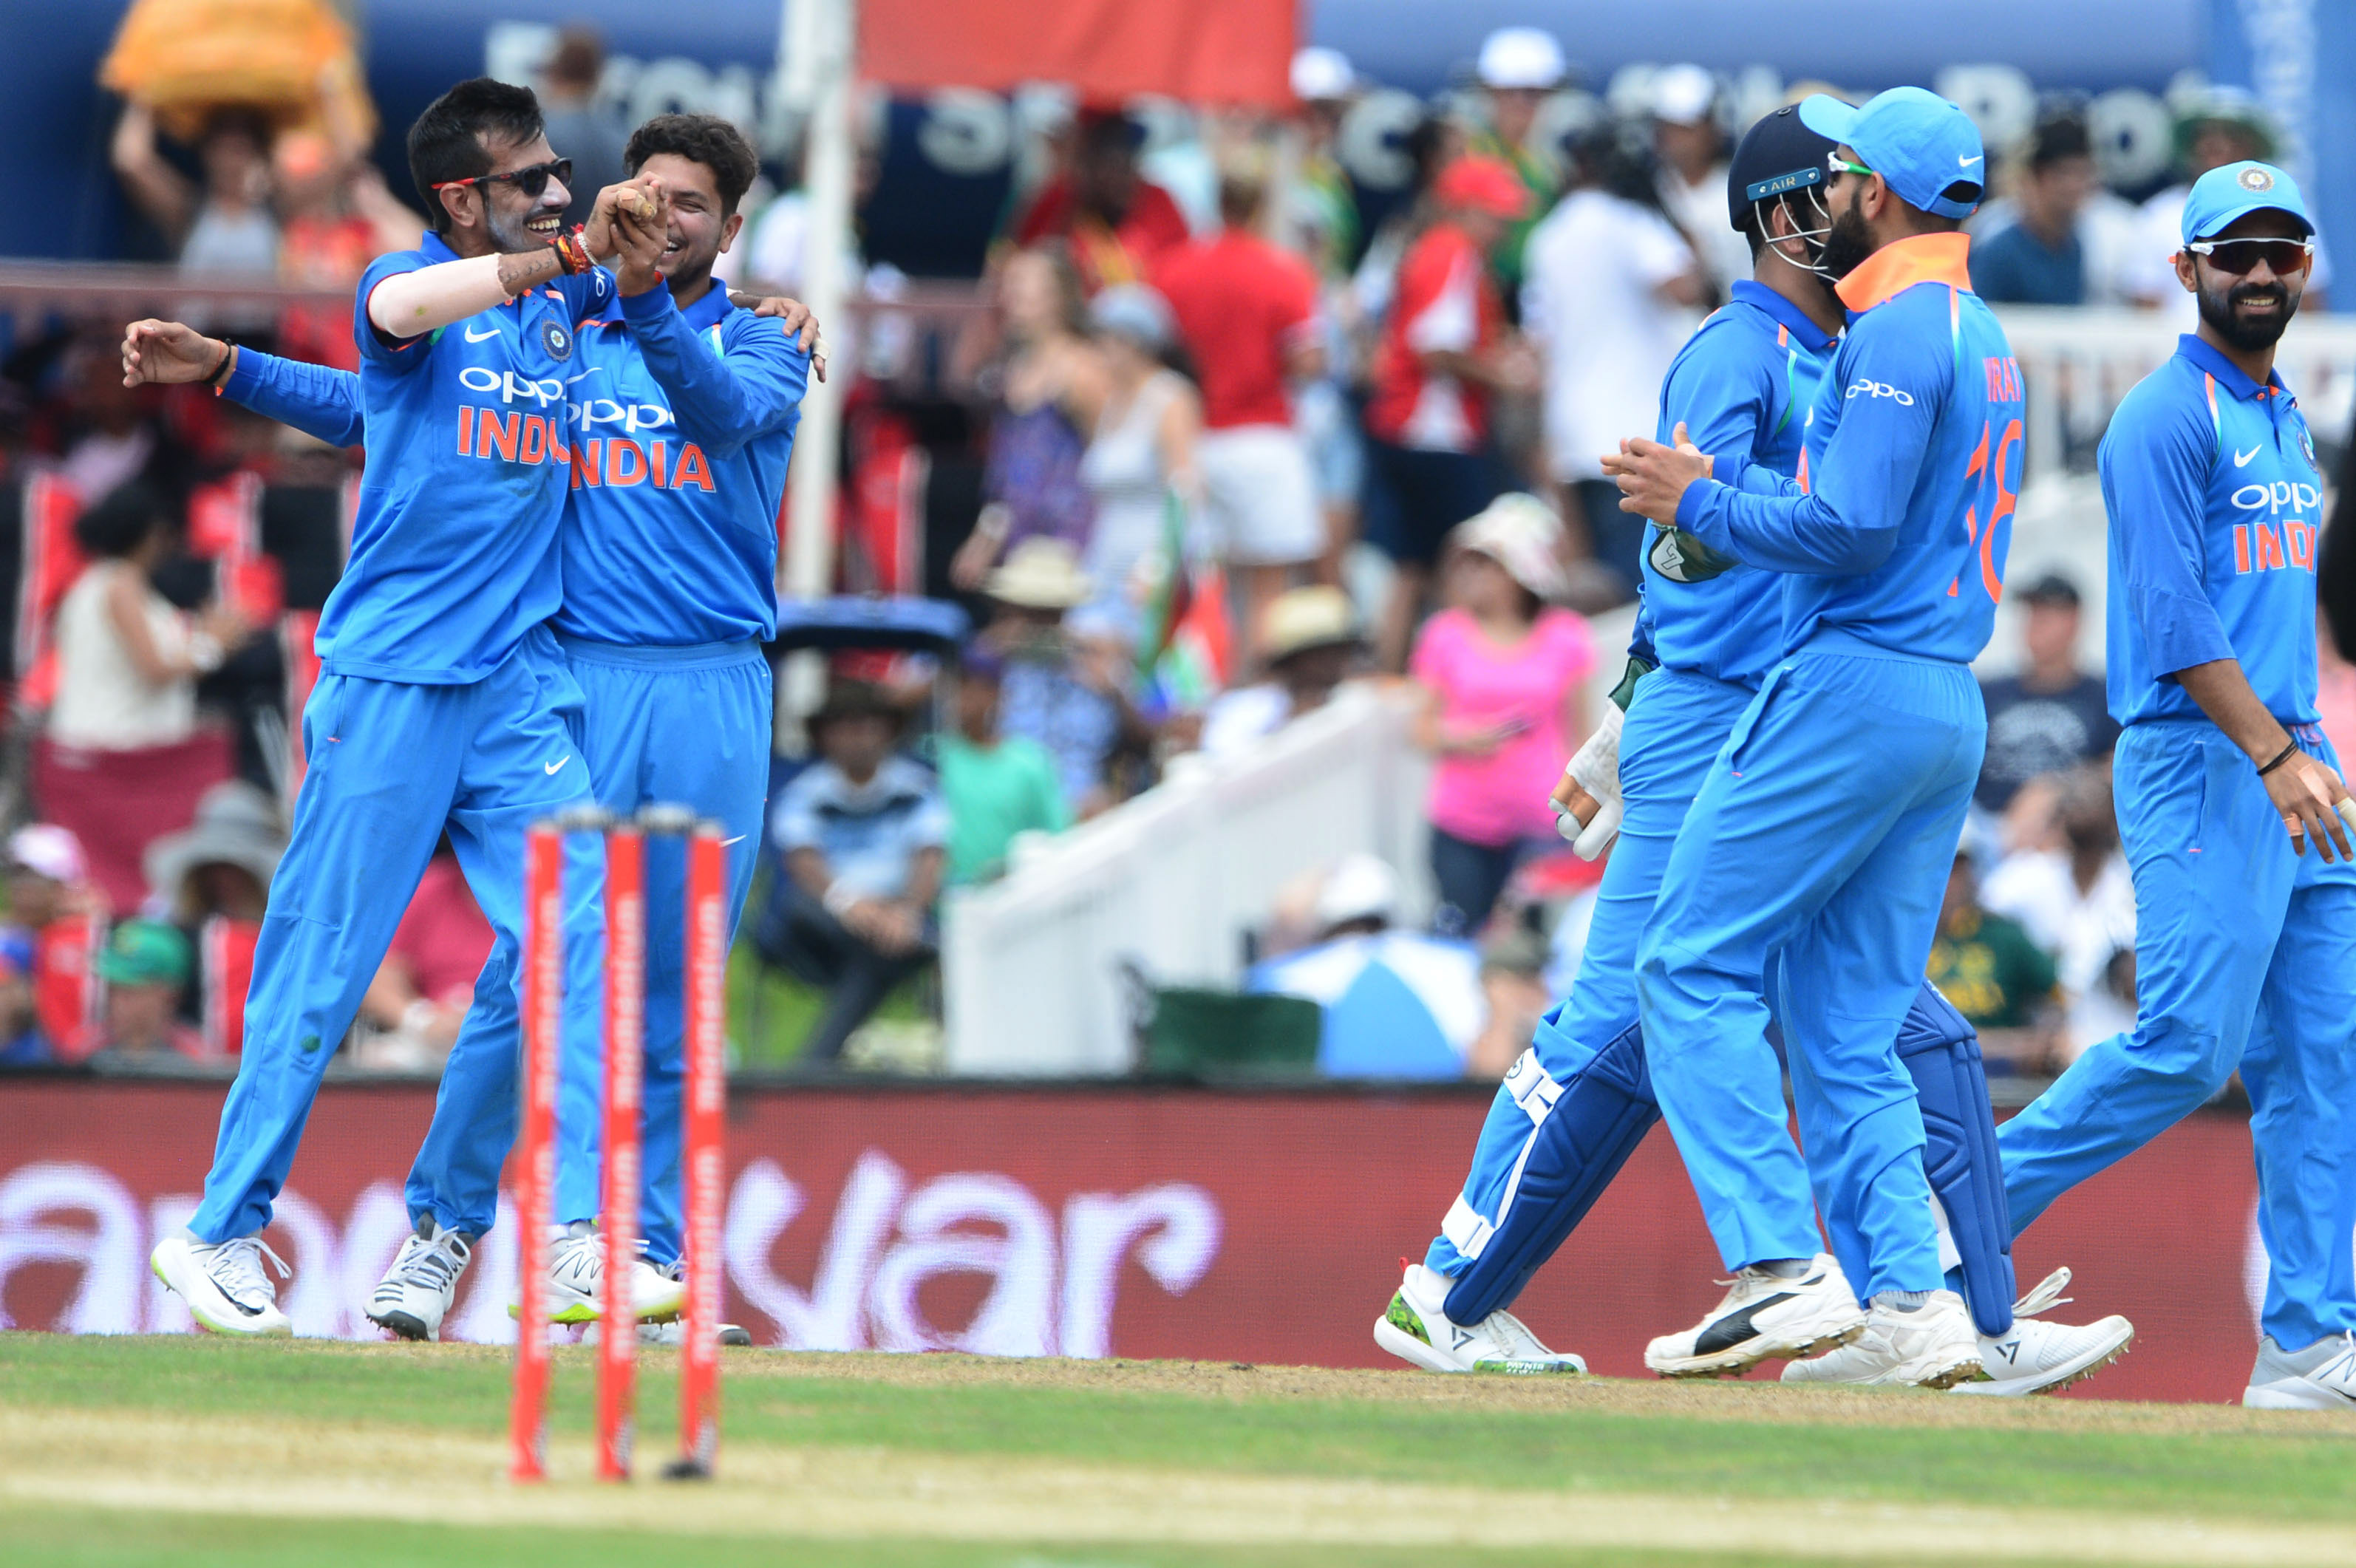 Unlikely that India will play Kul-Cha together in the T20 World Cup, asserts Deep Dasgupta